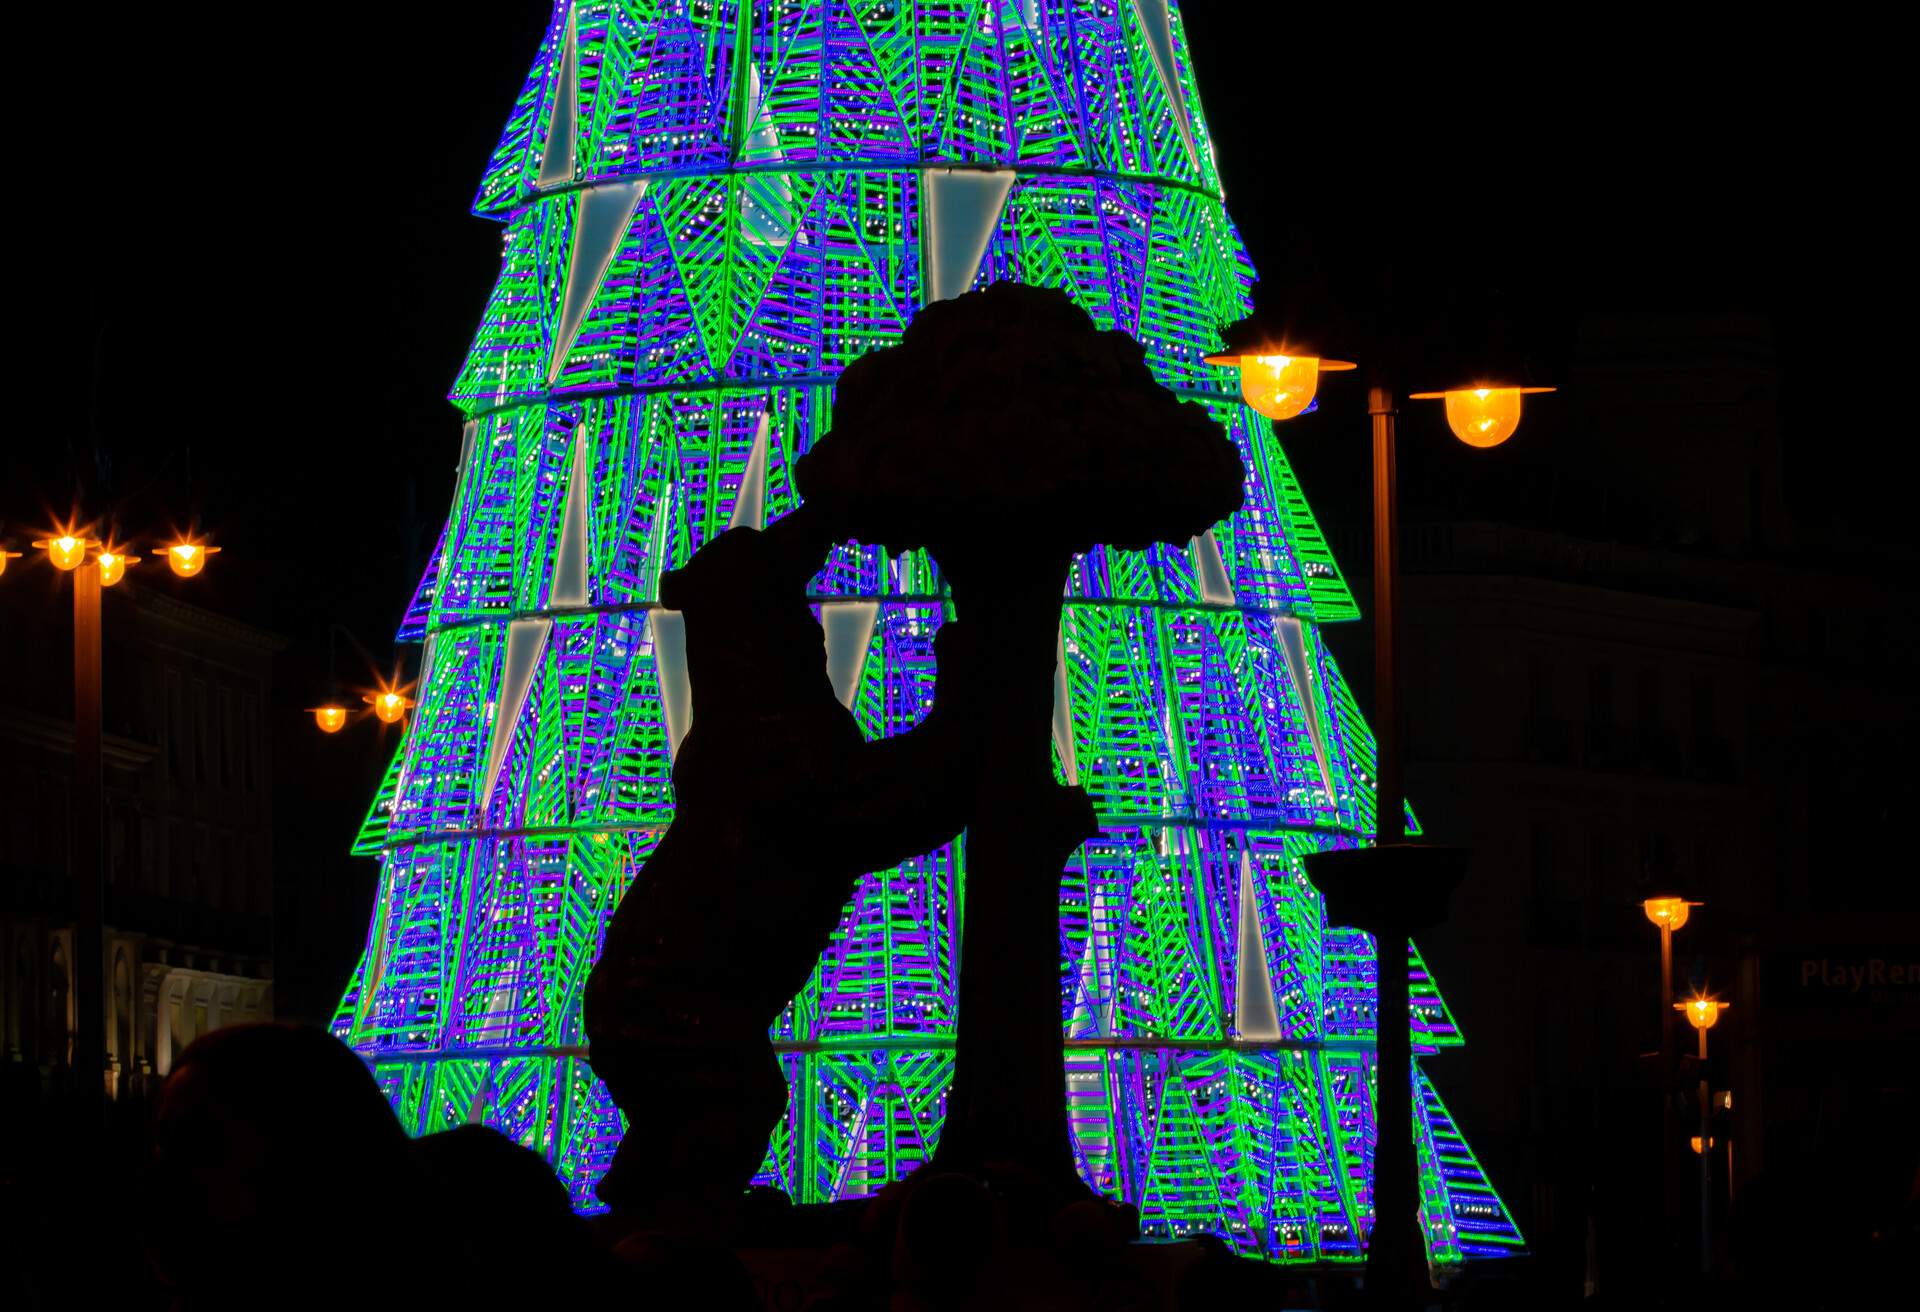 Madrid, Spain; 11 28 2020. Silhouette of the sculpture by the contrast with the Christmas tree in the background at Puerta del Sol.